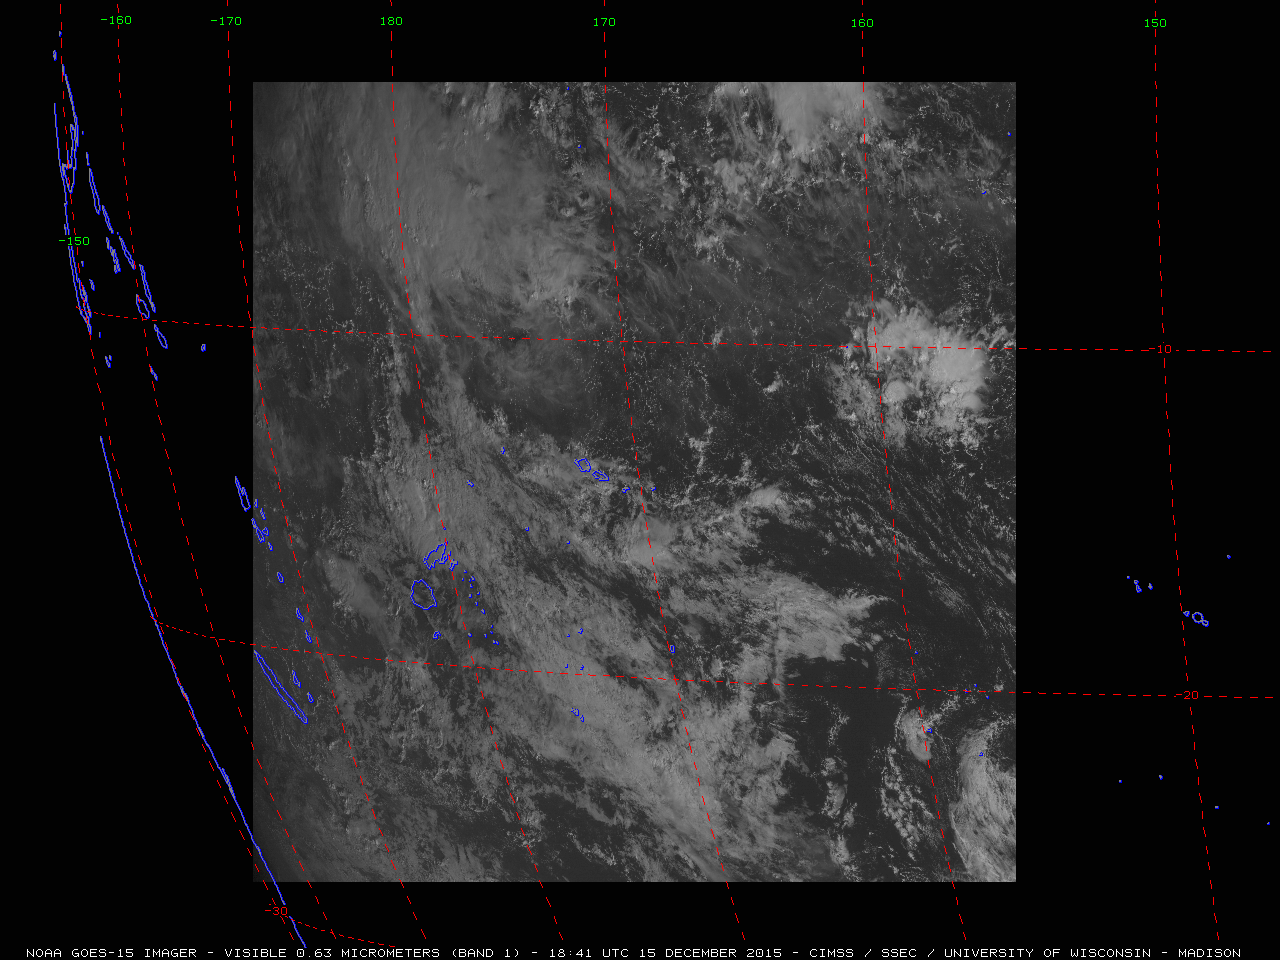 GOES-15 Visible (0.63 µm) image showing the size of the American Samoa RSO sector [click to enlarge]